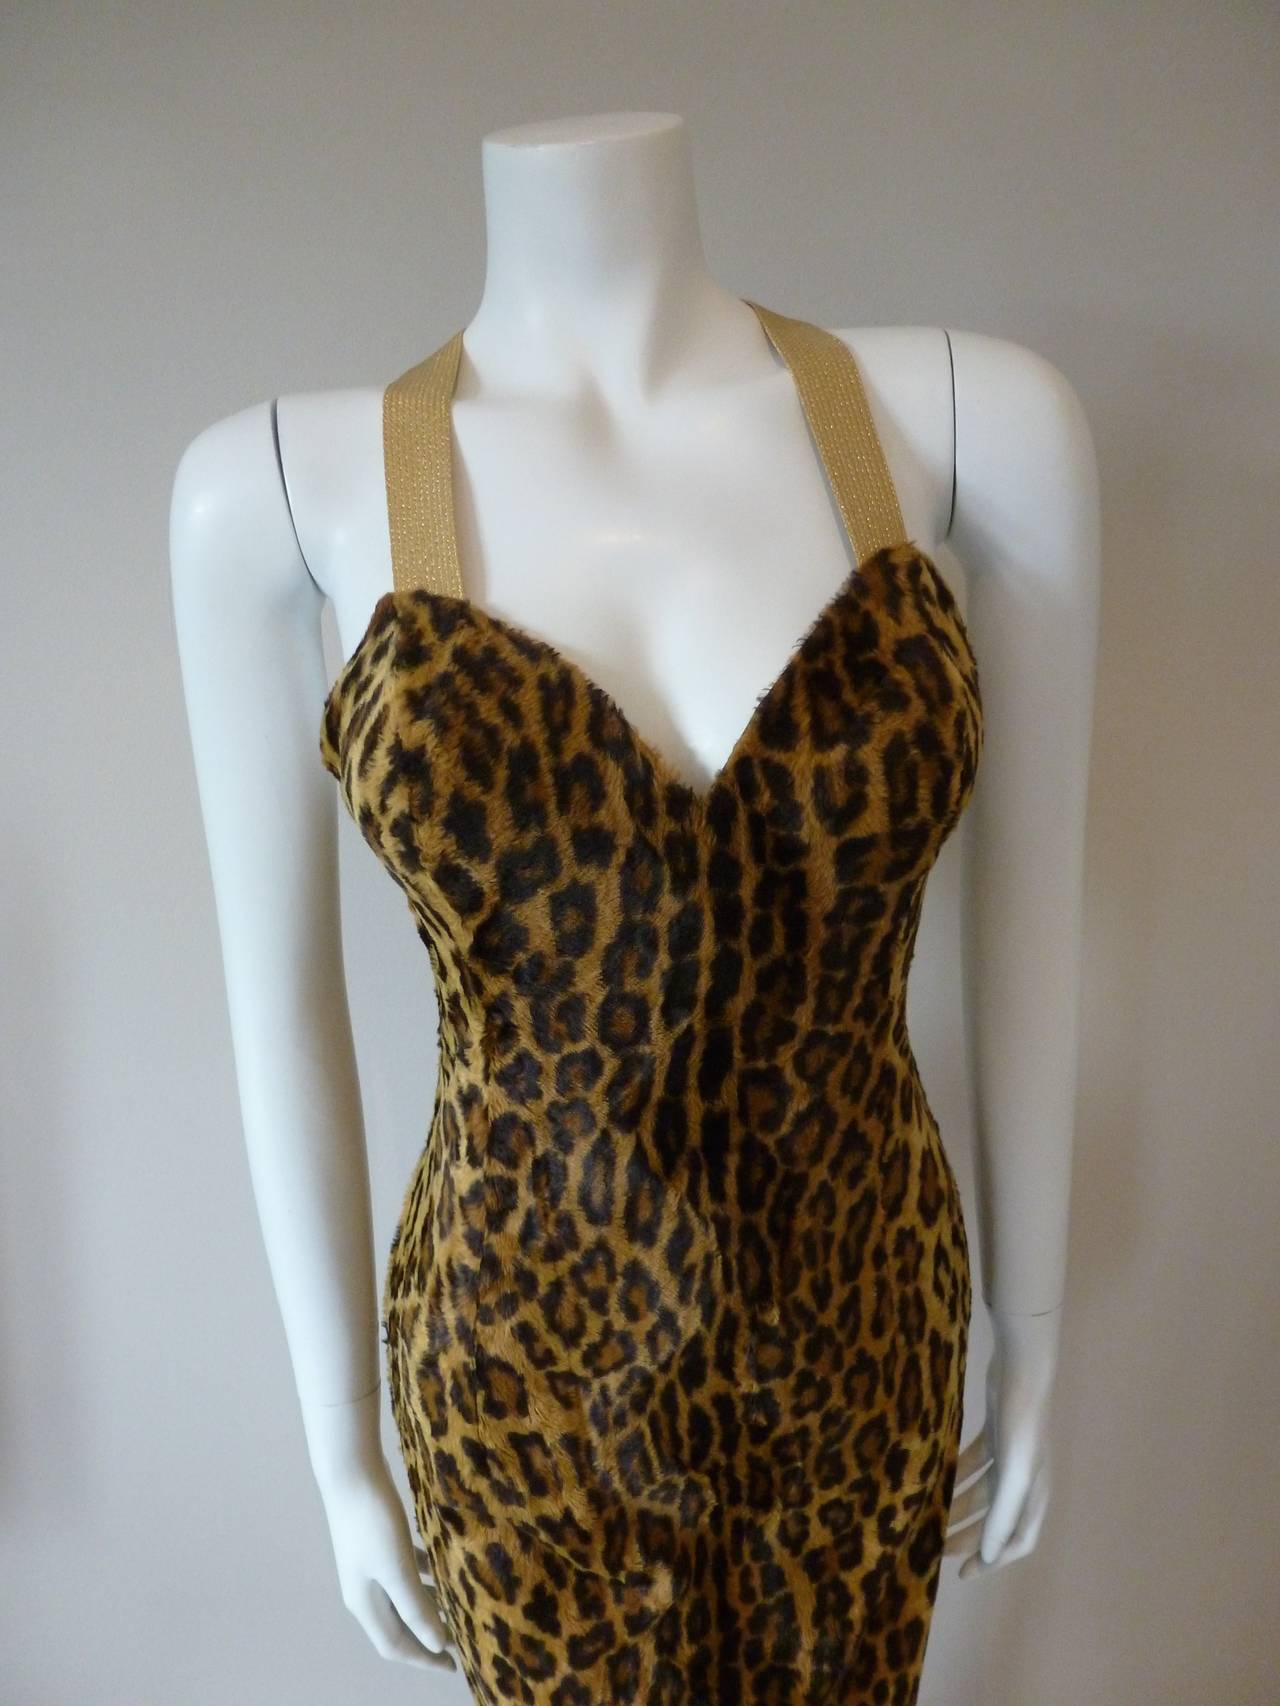 Gianni Versace Couture animal print cotton and silk fur effect gown from the Fall 1994 collection. The gown is fully lined in brown and black animal printed silk.

Marked an Italian 40.

Manufacturer - Alias S.p.a.